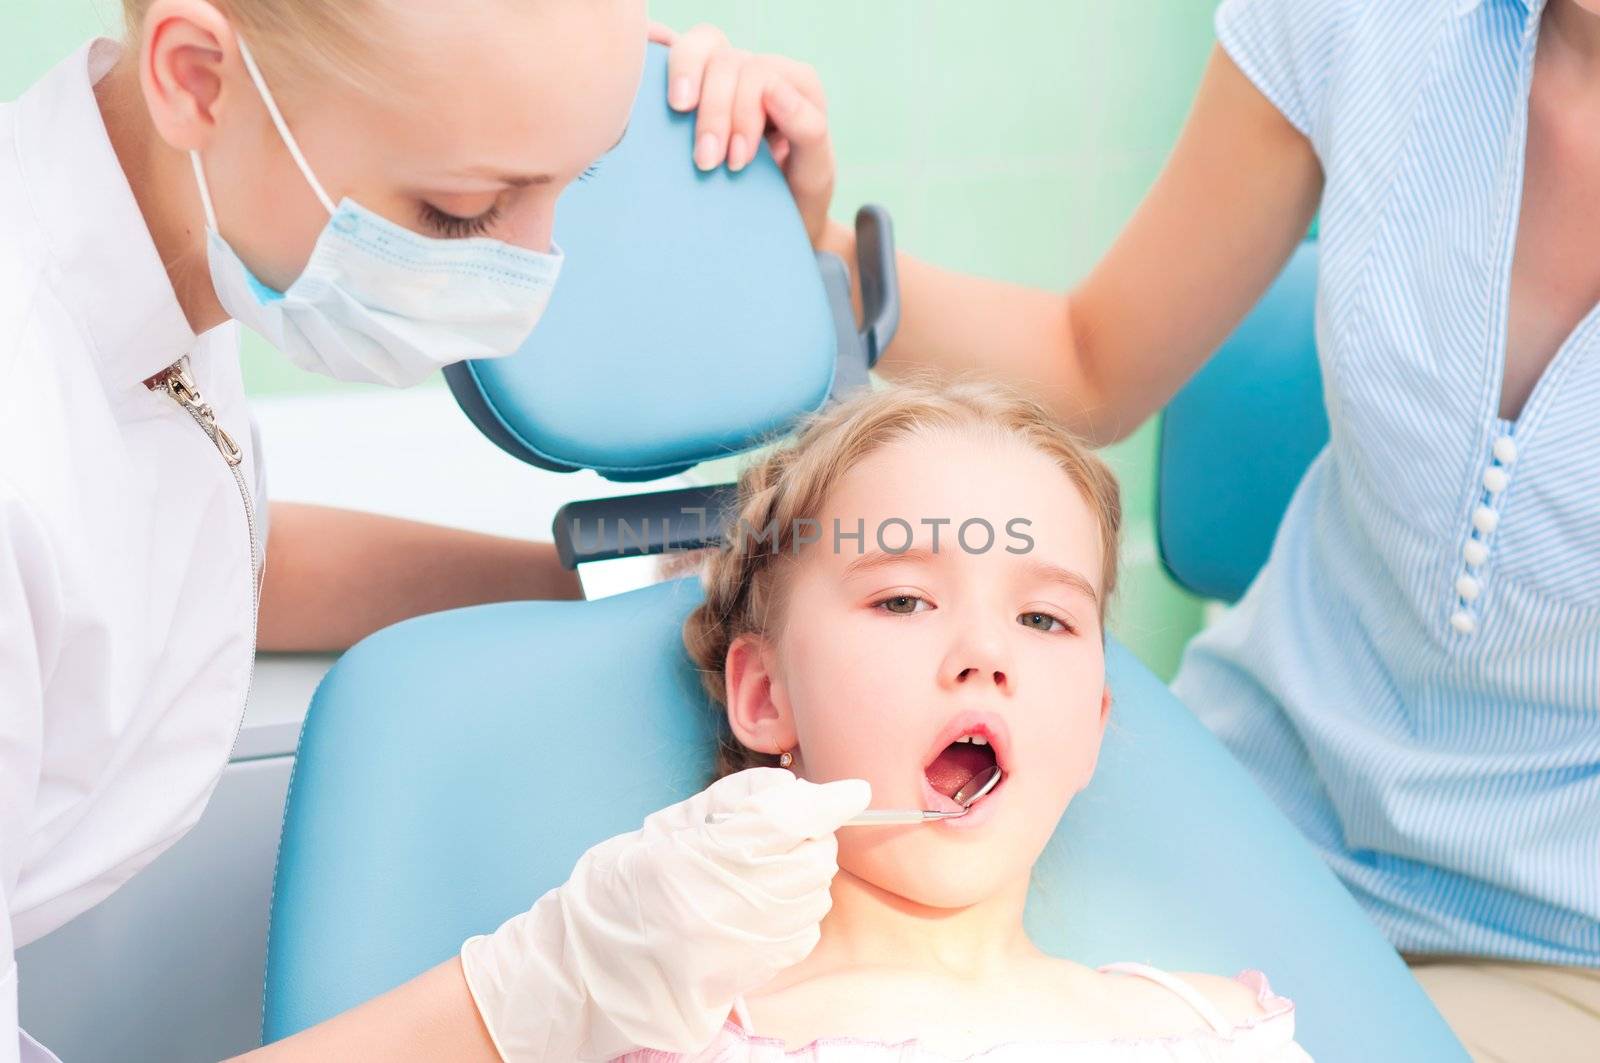 female dentists examines a child by adam121